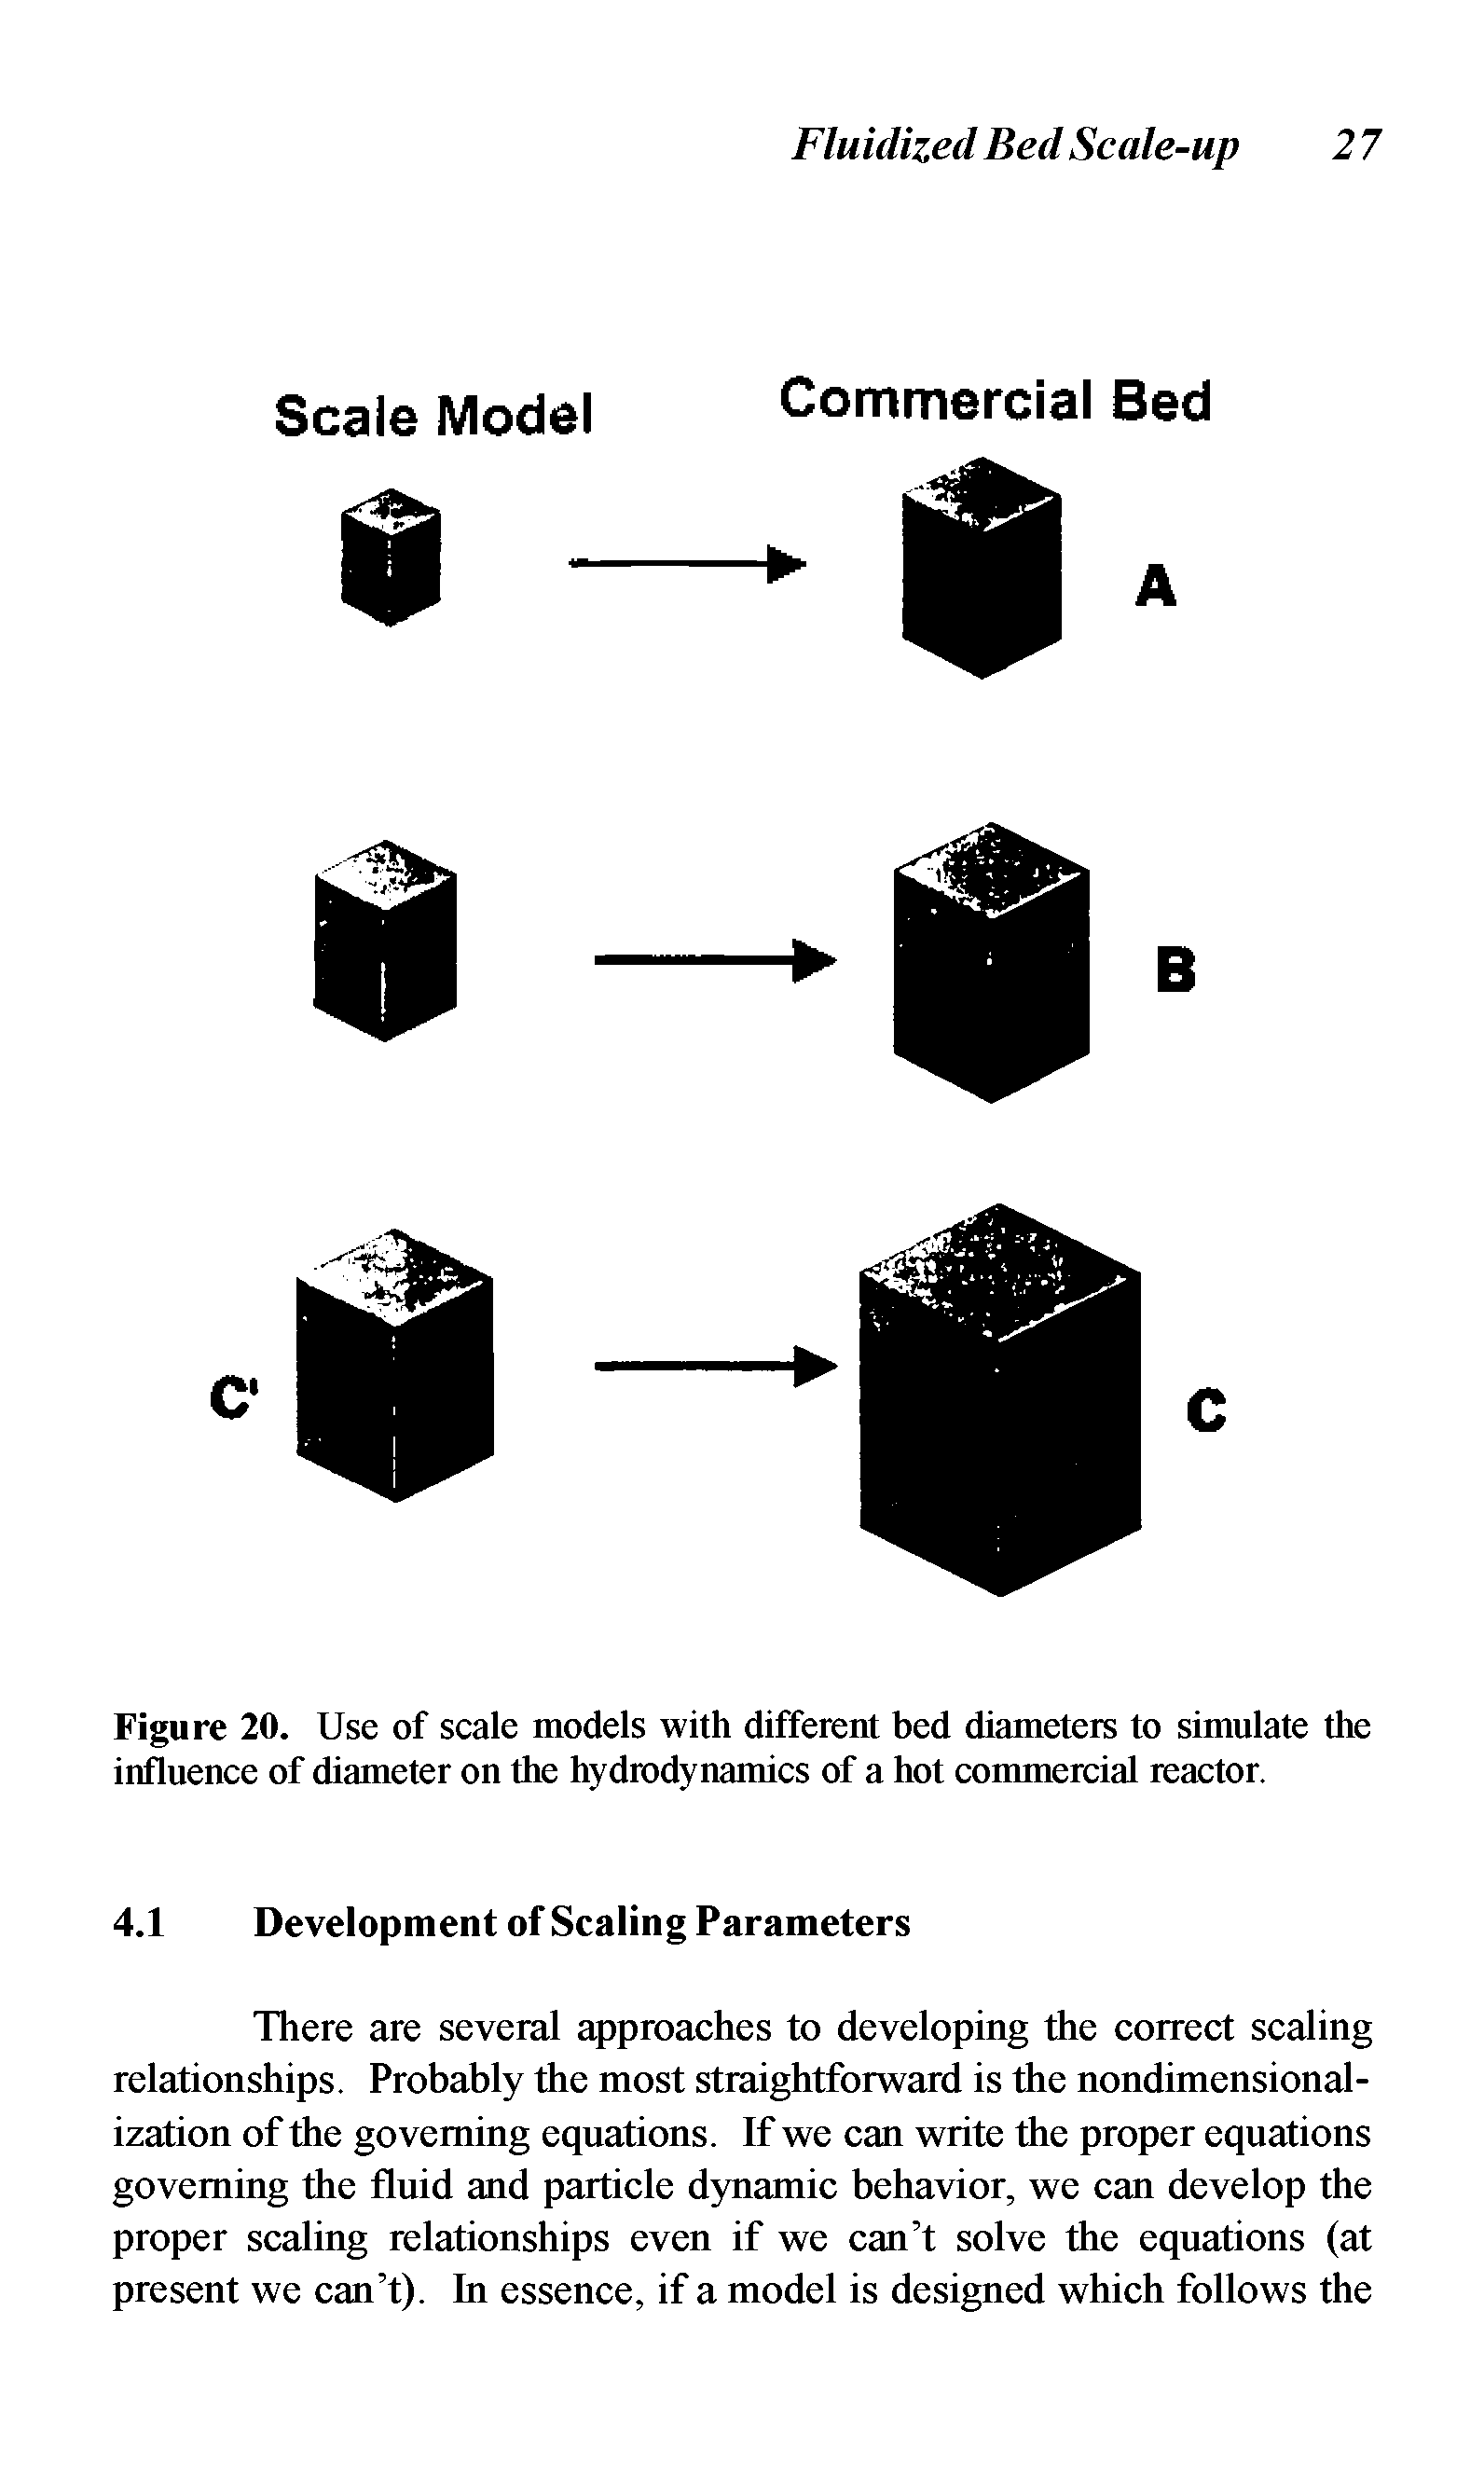 Figure 20. Use of scale models with different bed diameters to simulate the influence of diameter on the hydrodynamics of a hot commercial reactor.